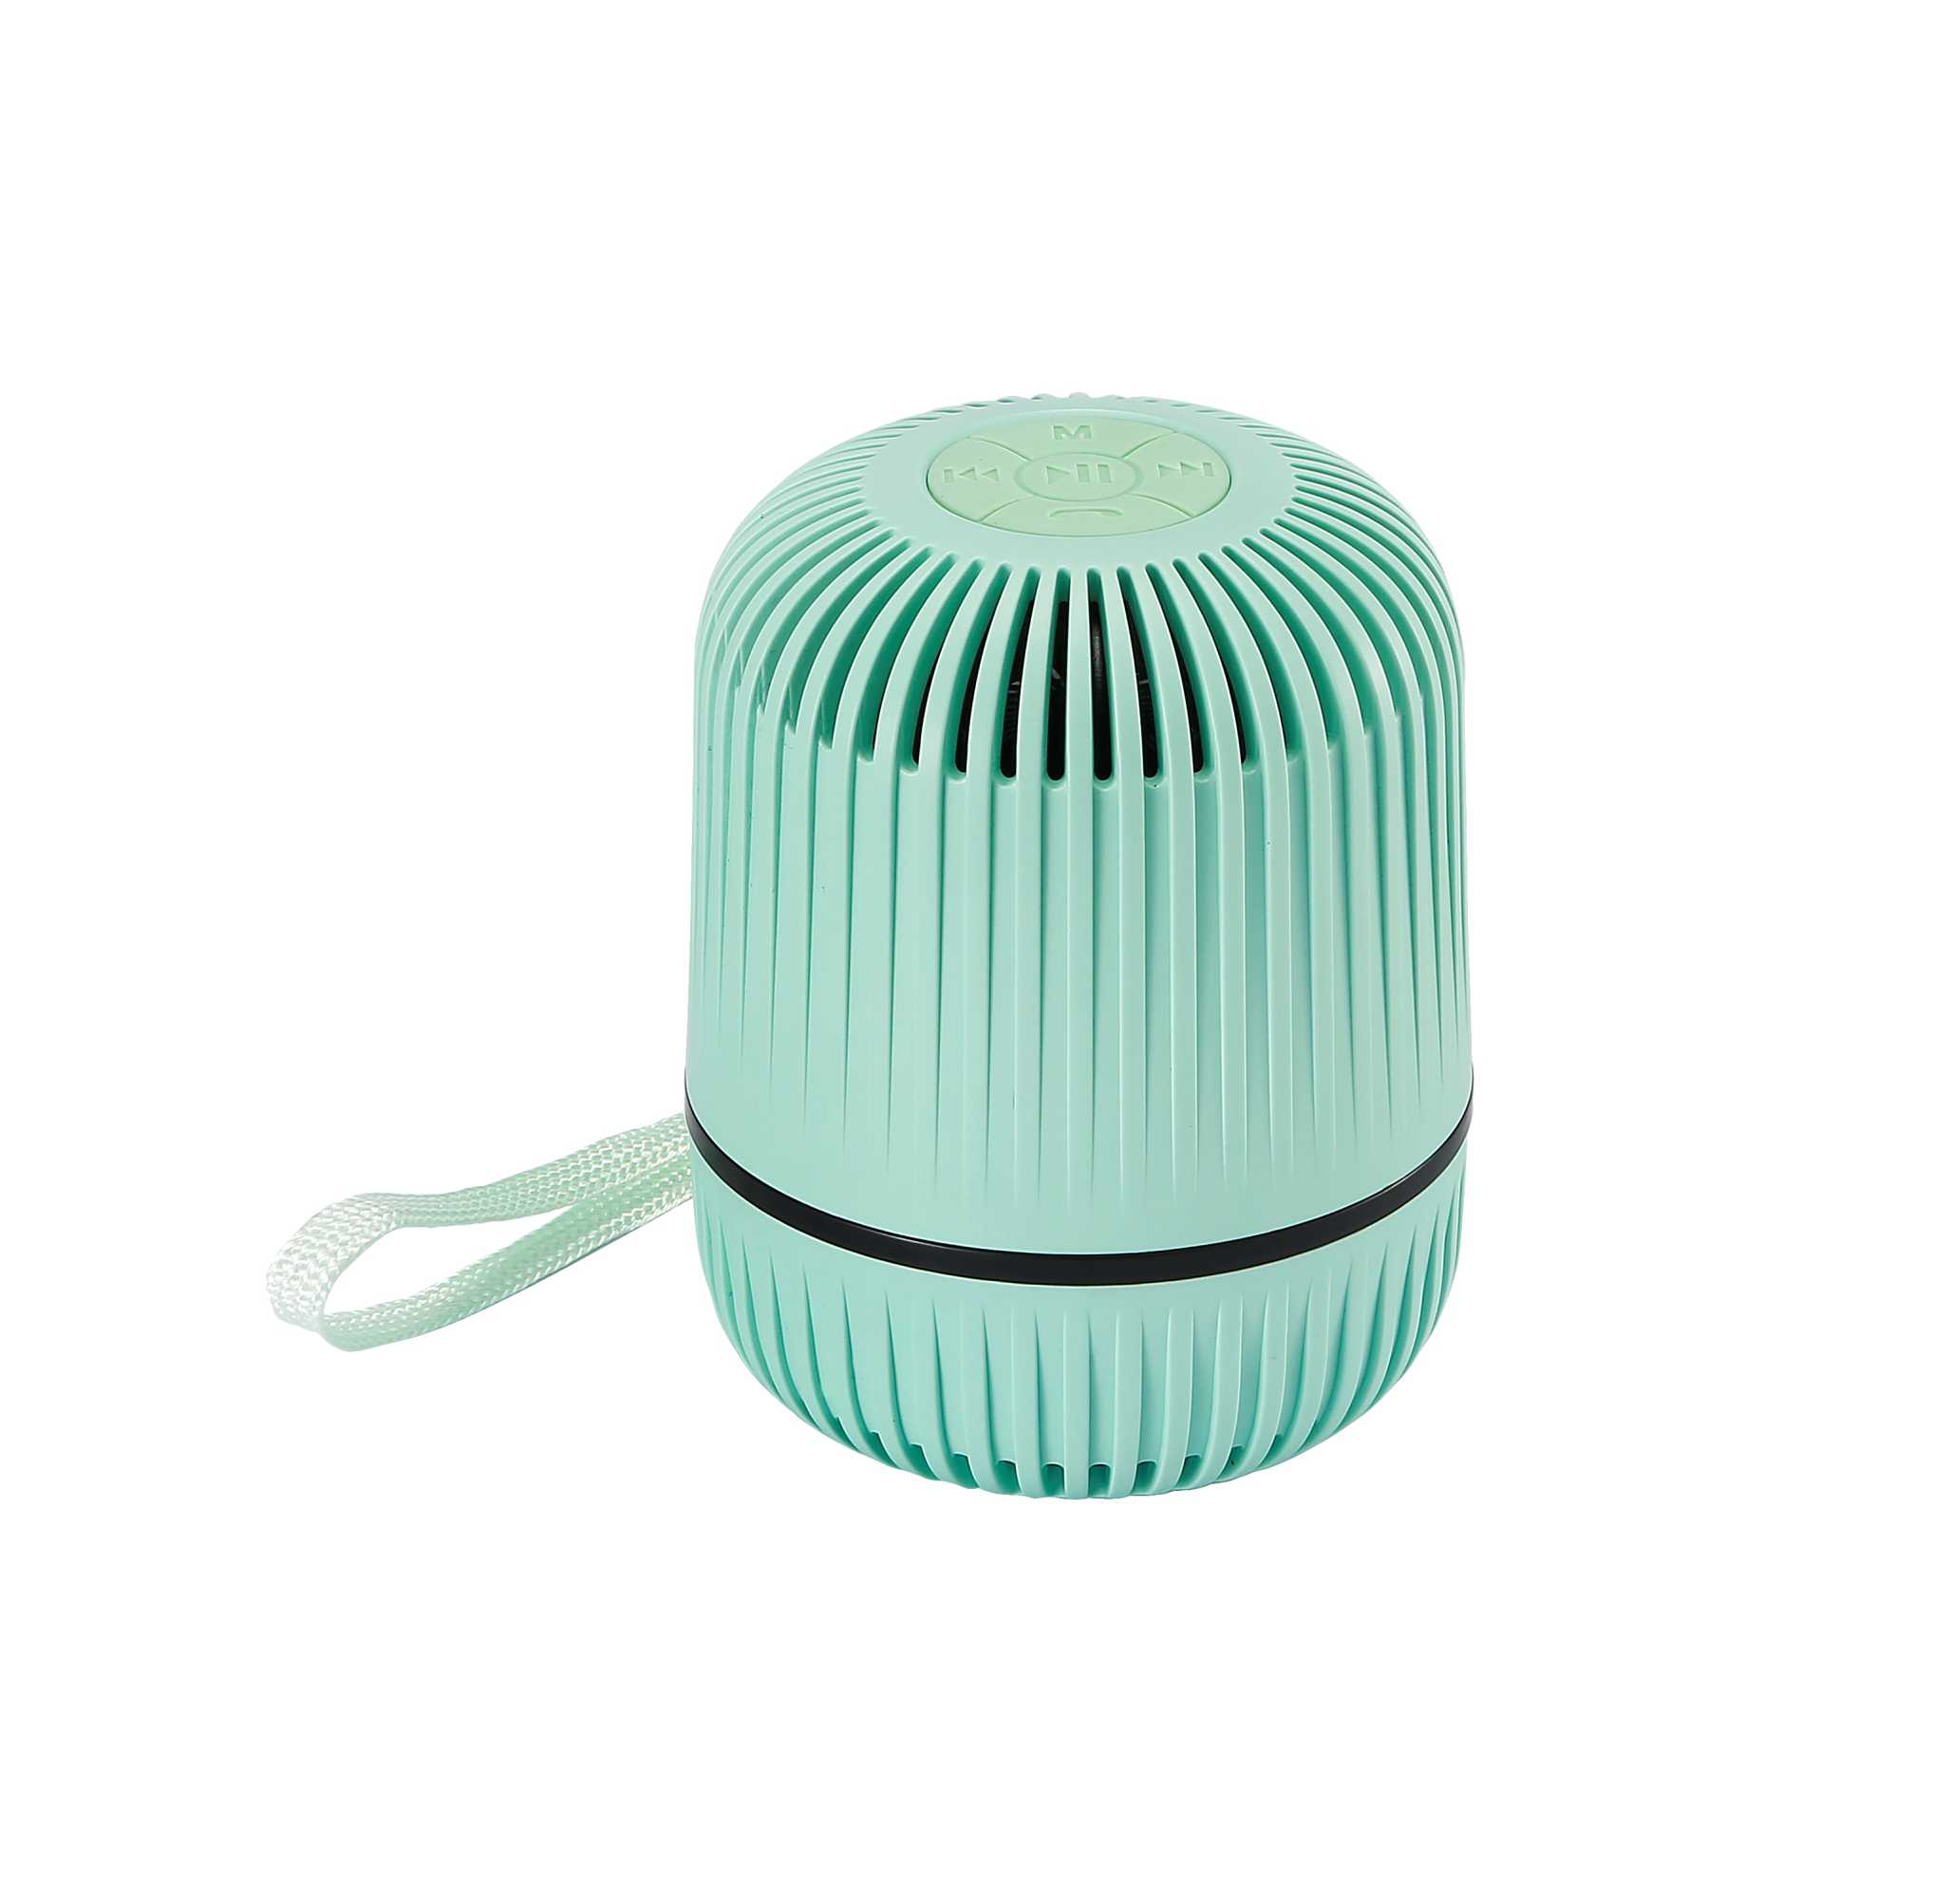 HS-2691 Mini speaker Bluetooth support hands-free call outdoor portable speaker